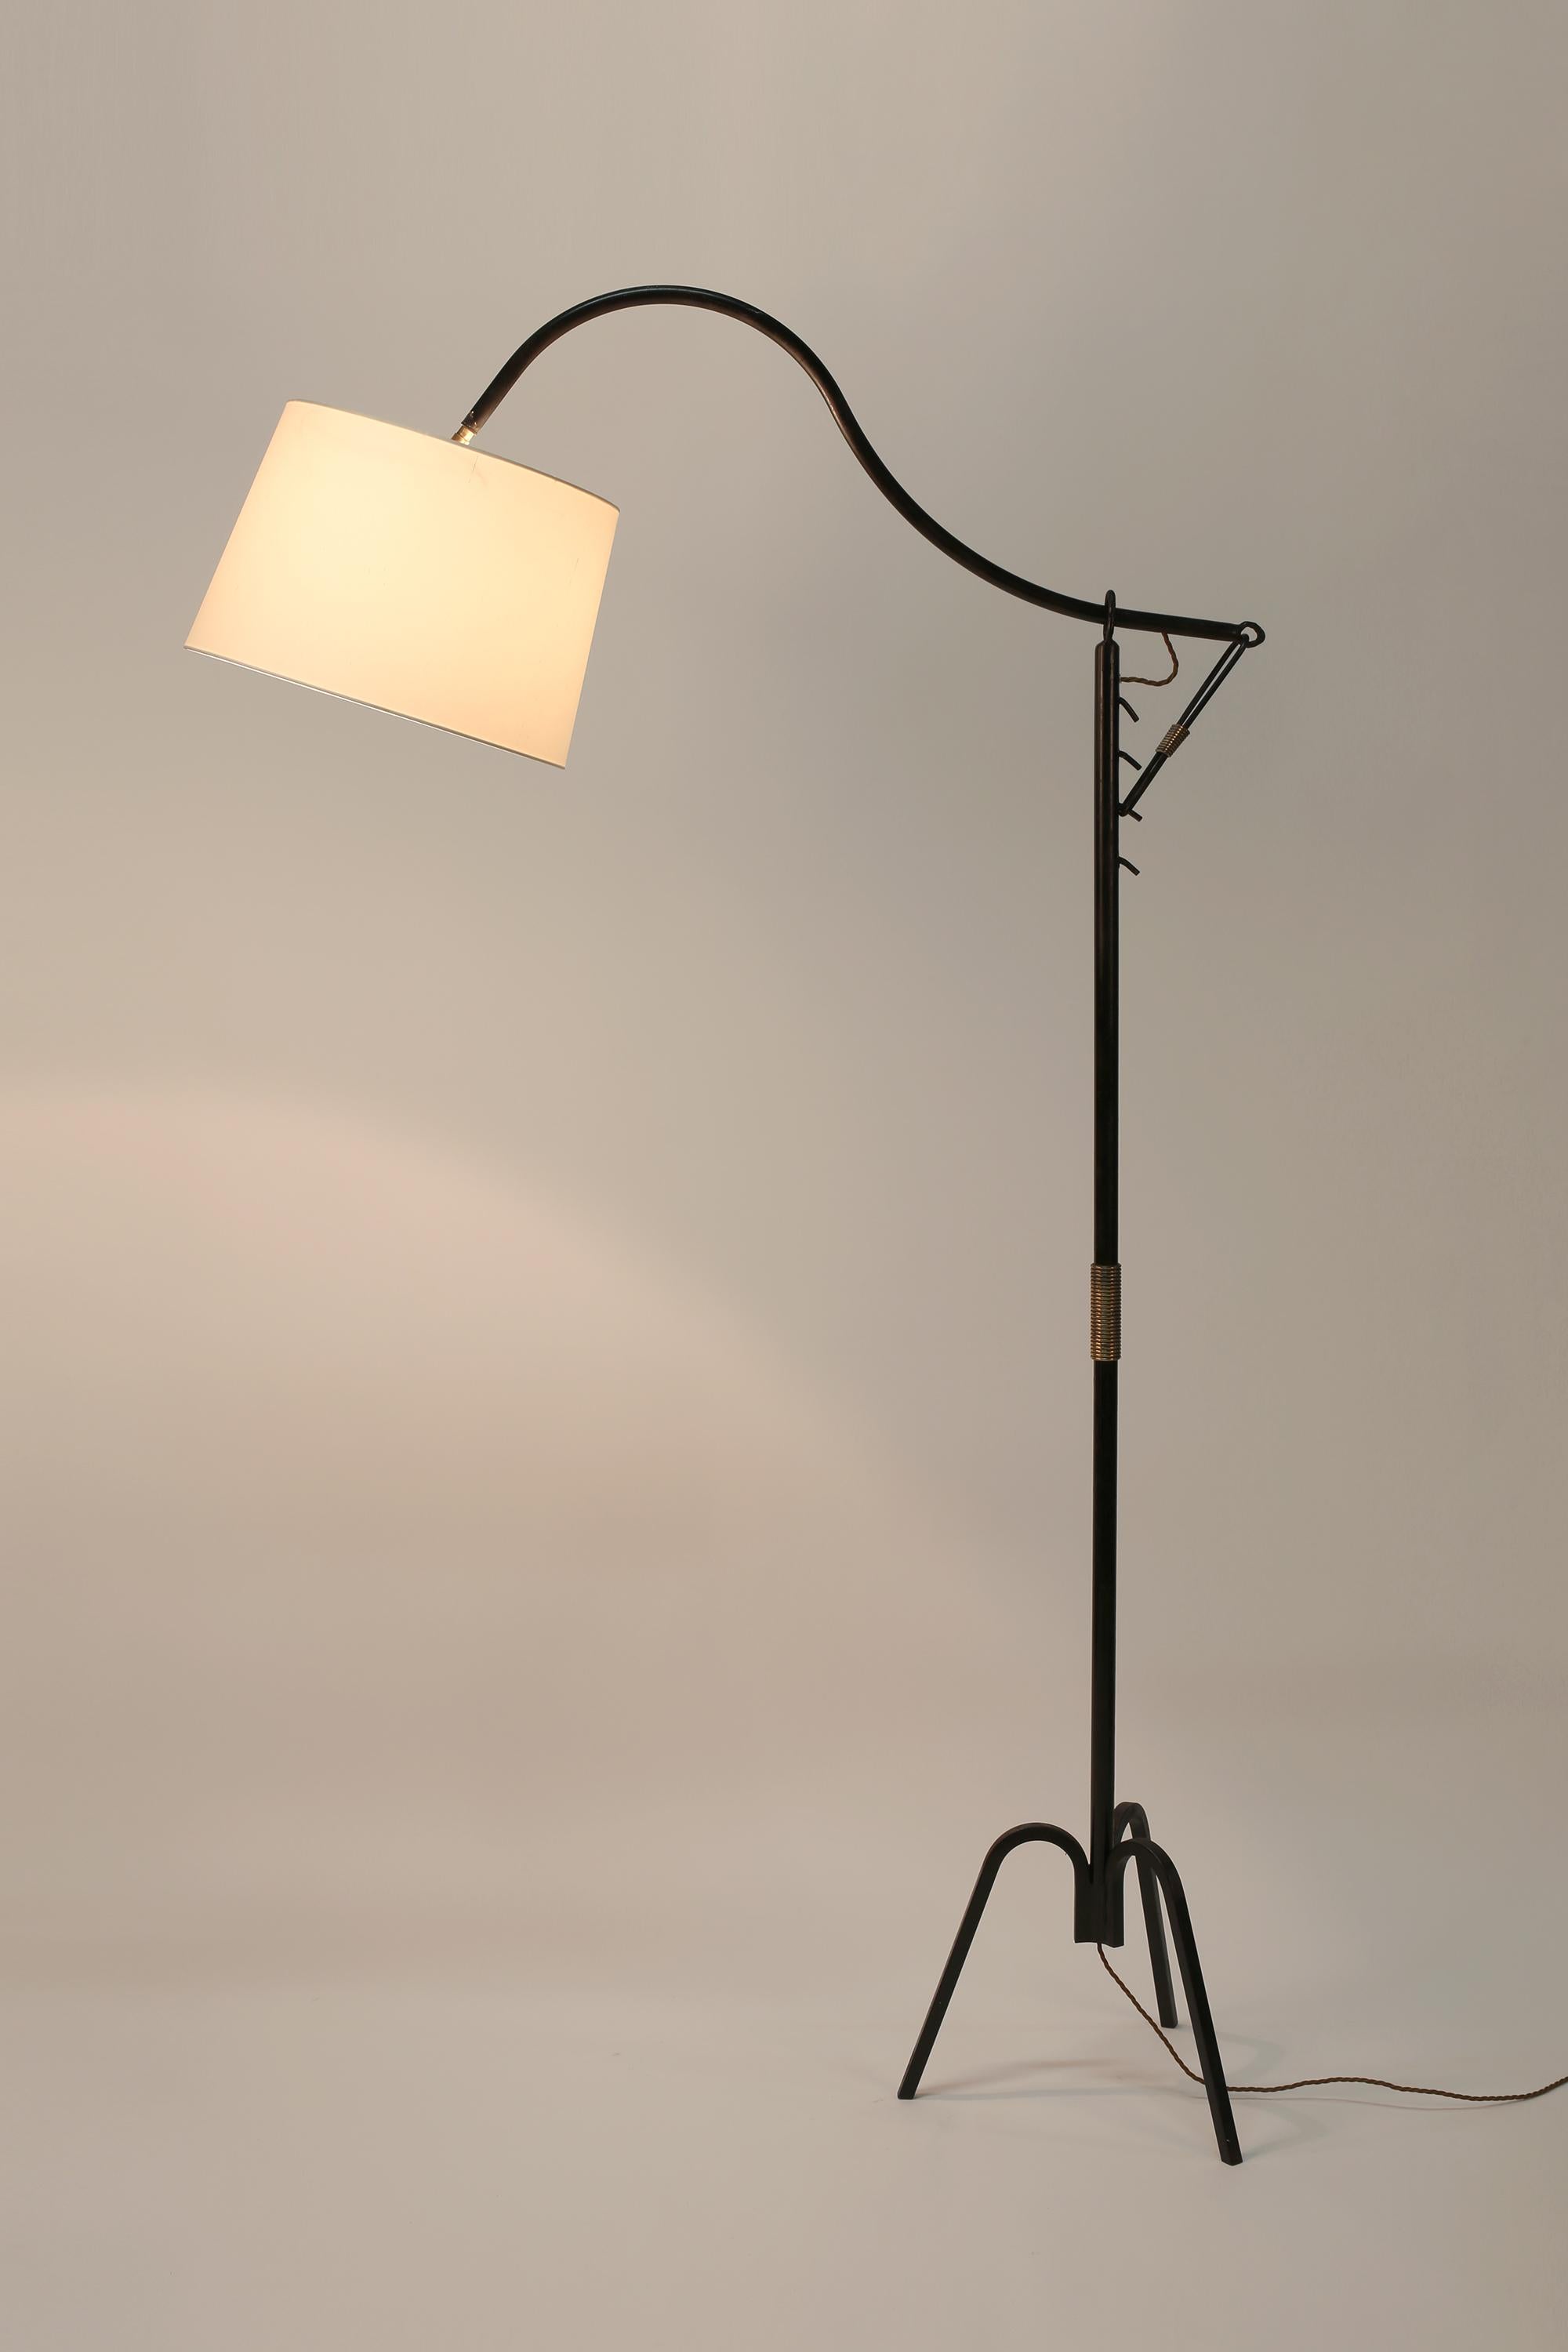 A forged and enamelled iron floor lamp with decorative gilt bronze detailing, attributed to Jacques Adnet. Featuring unique ‘crémaillère’ height adjustment systems and tripod base. French, c. 1950. Supplied with an off-white dupion silk